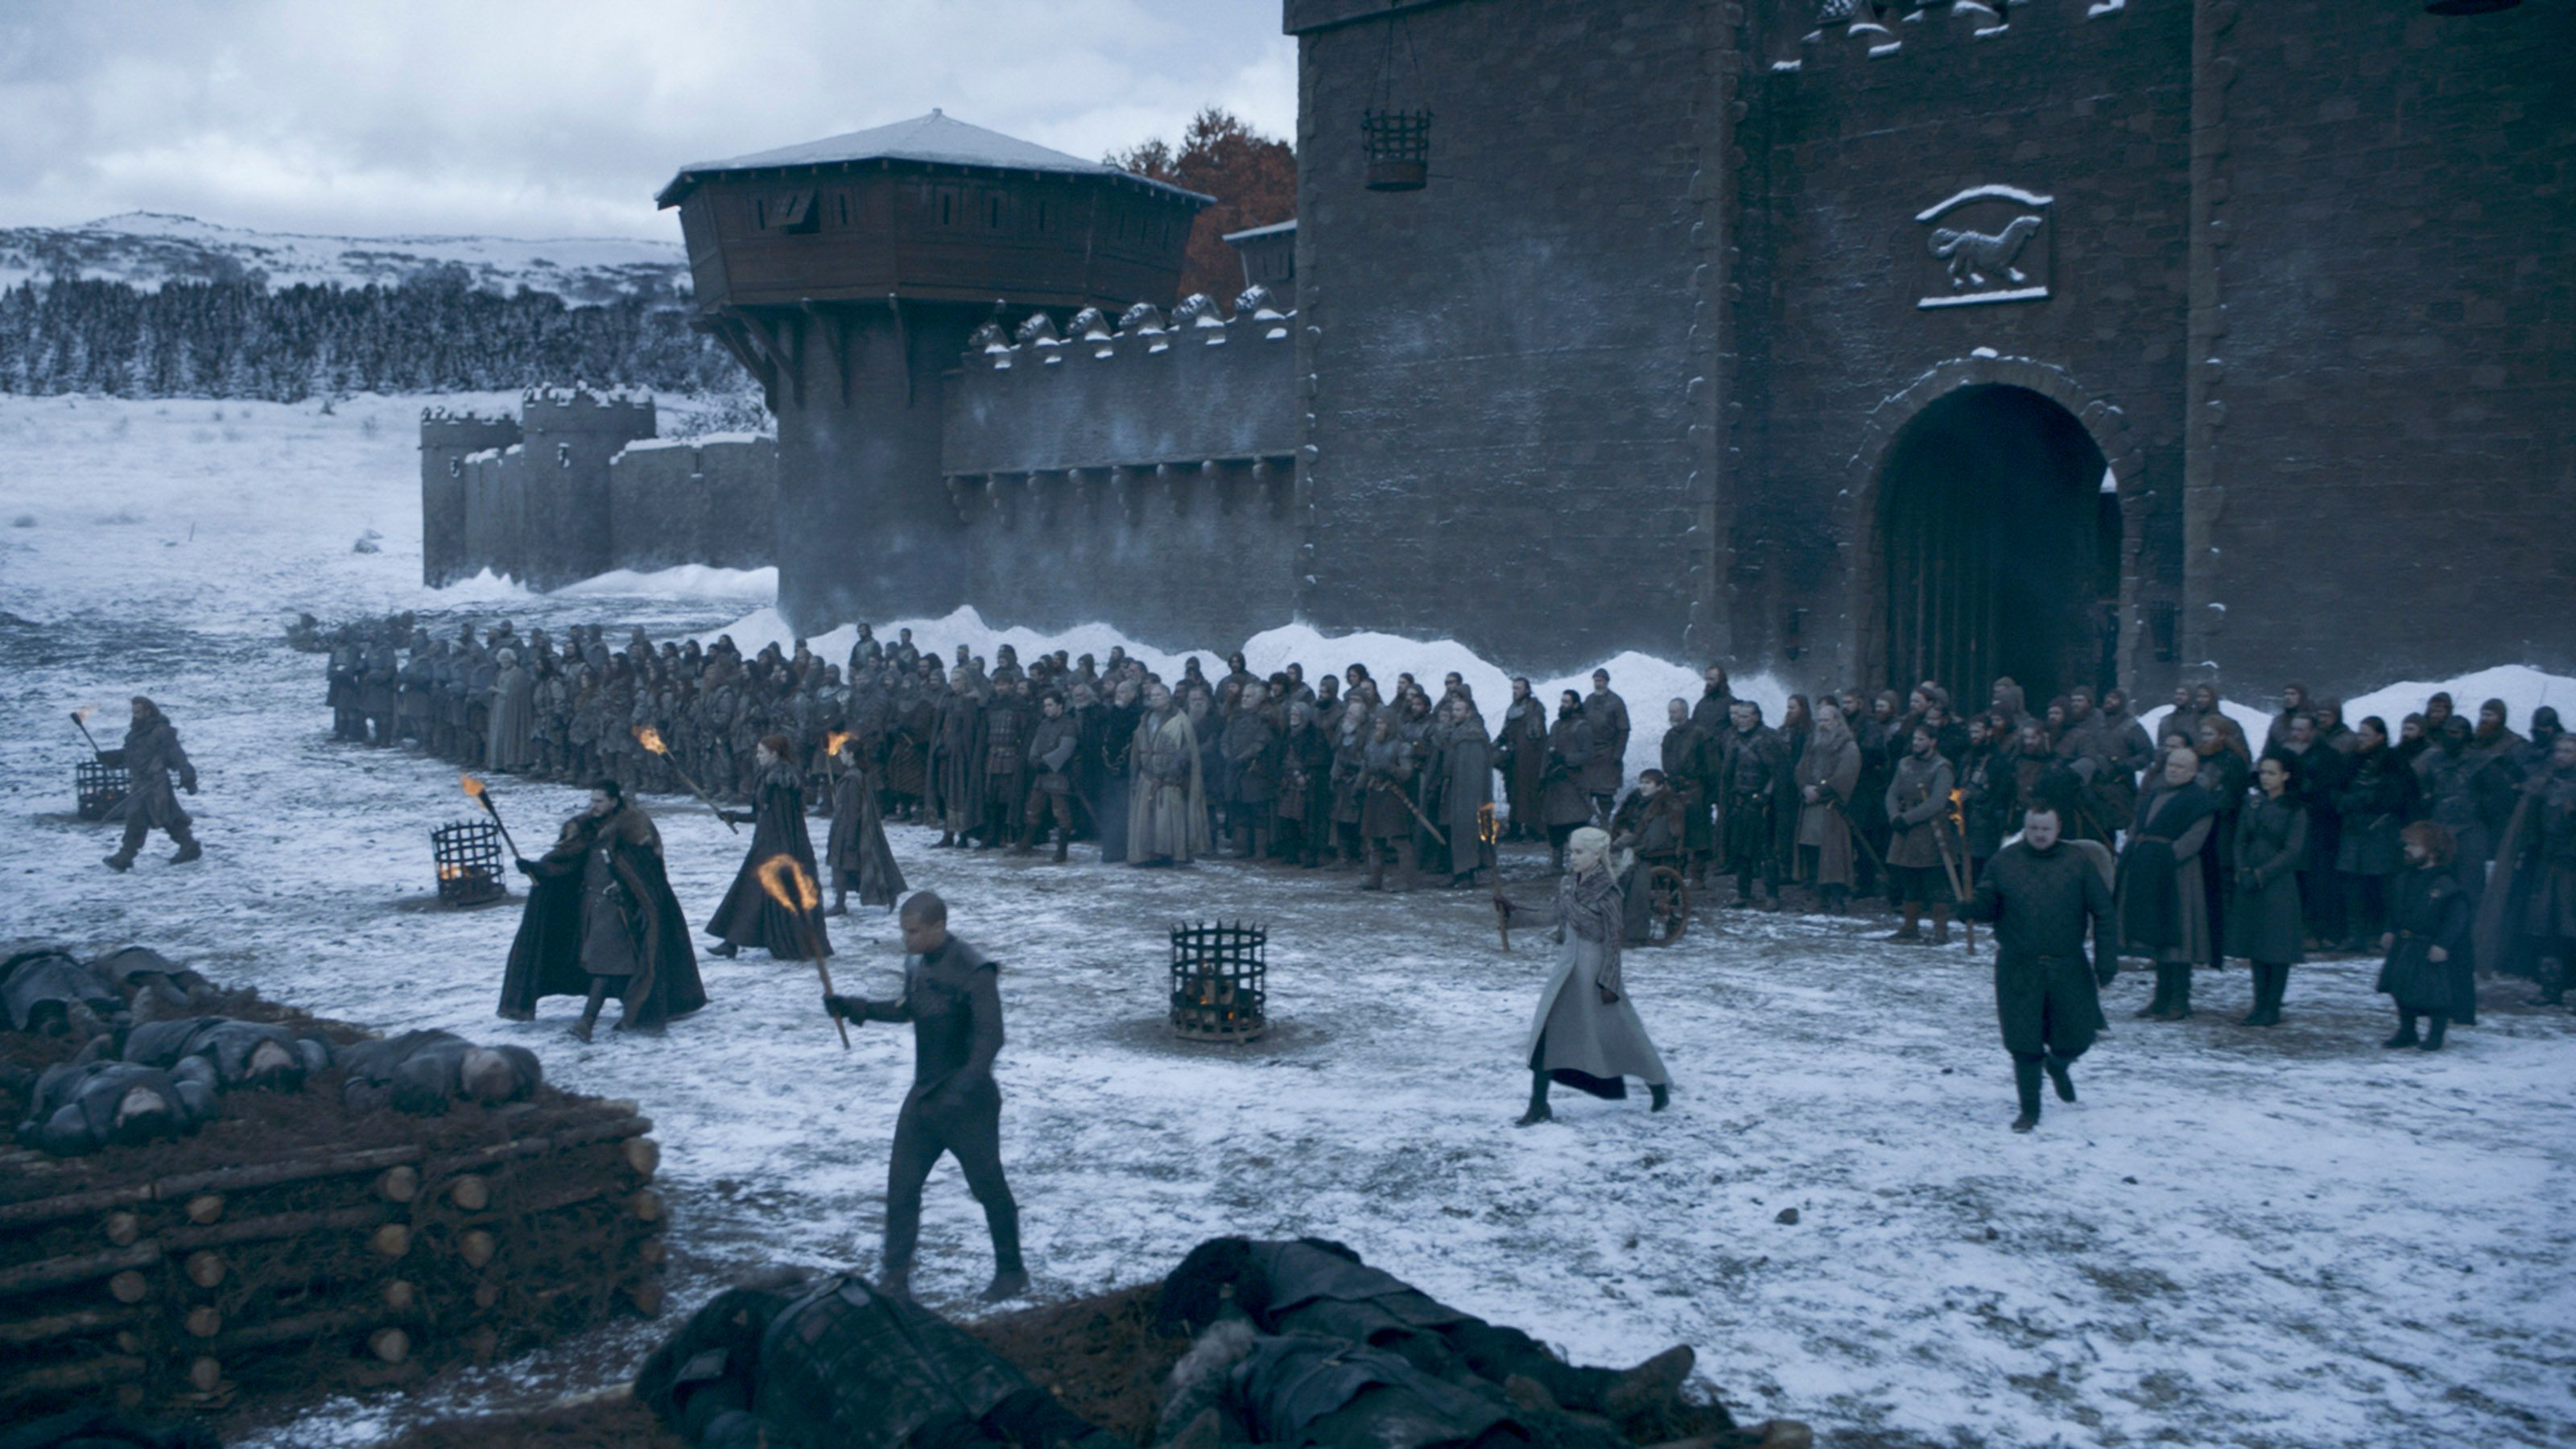 Game Of Thrones Season 8 Episode 4 Images Reveal A Funeral A